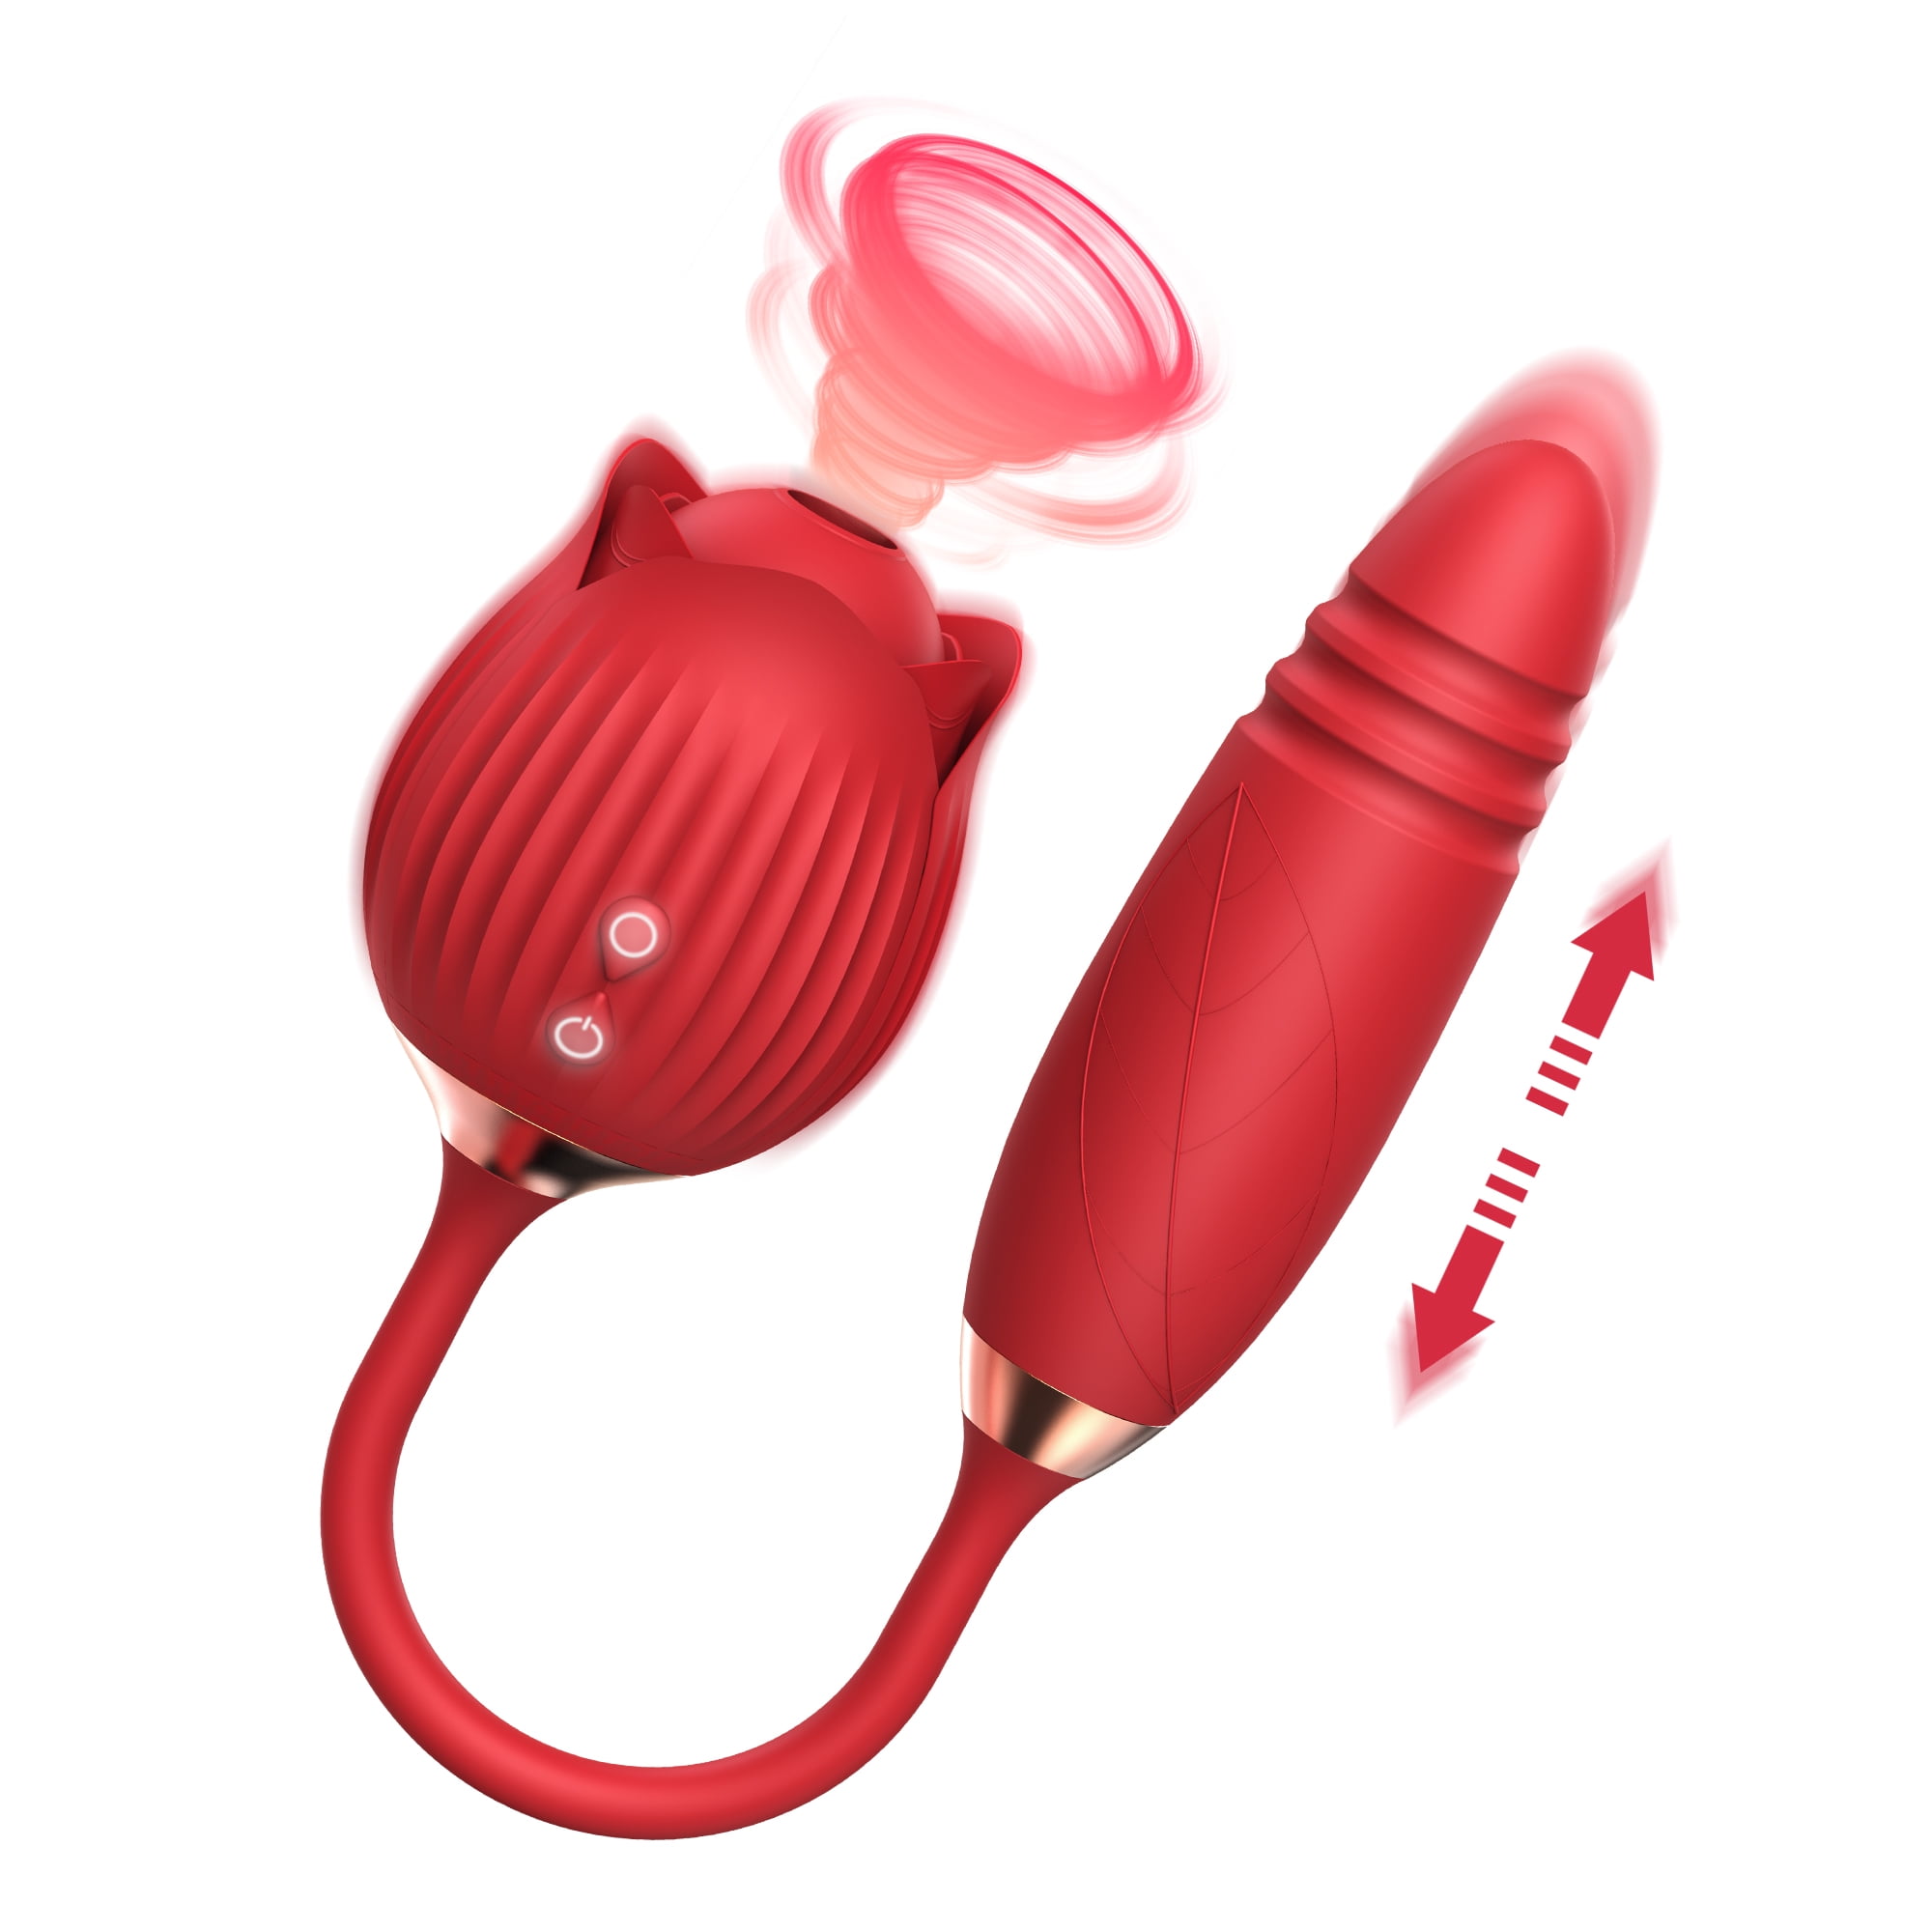 DARZU Rose Toy Vibrator for Women, G Spot Adult Sex Toys with Vibrating Egg 